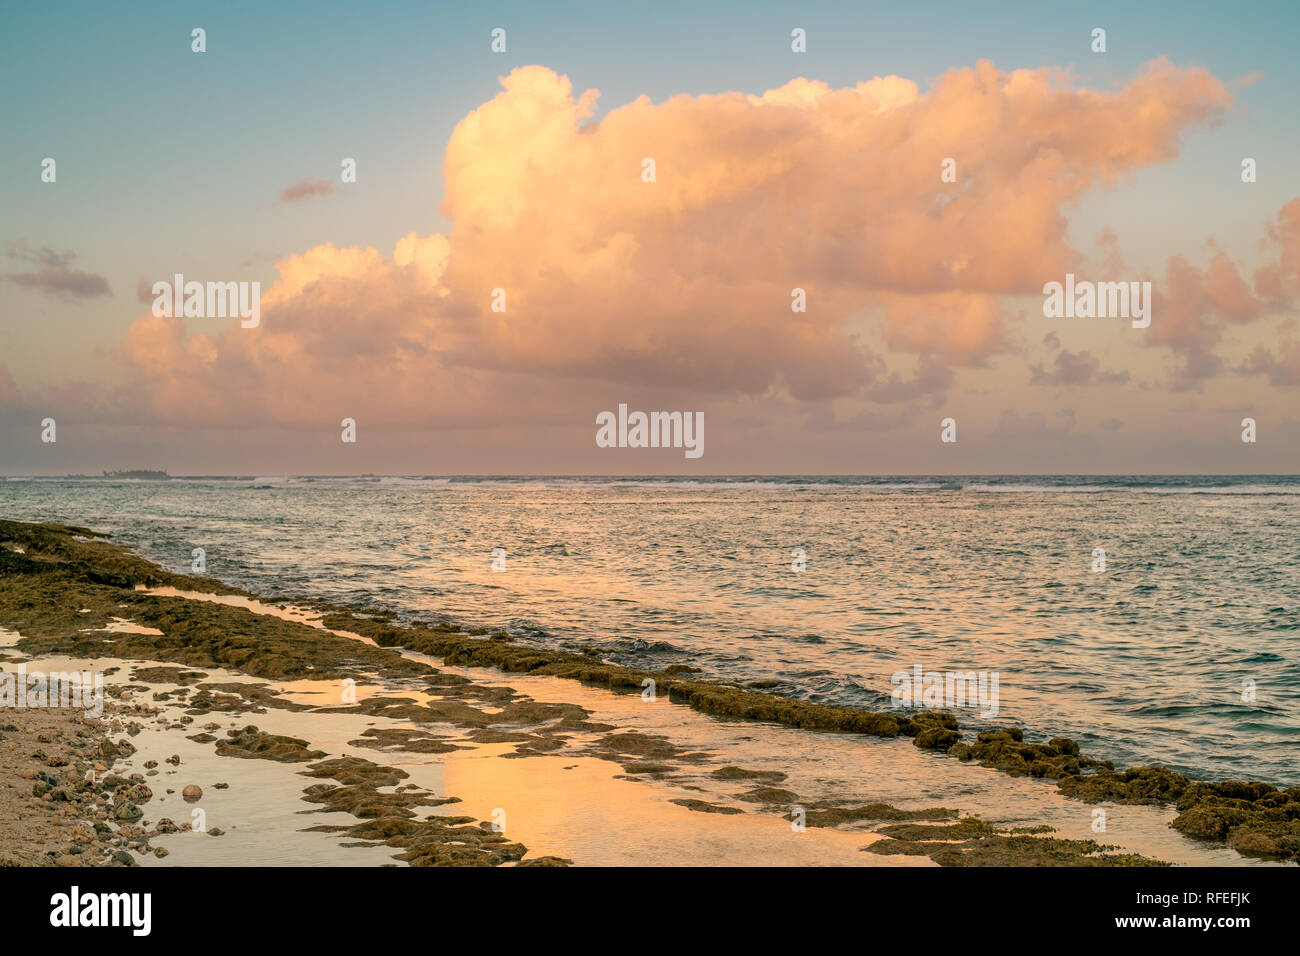 The shoreline reflect clouds at sunset time. San Andrés island, Colombia. Stock Photo